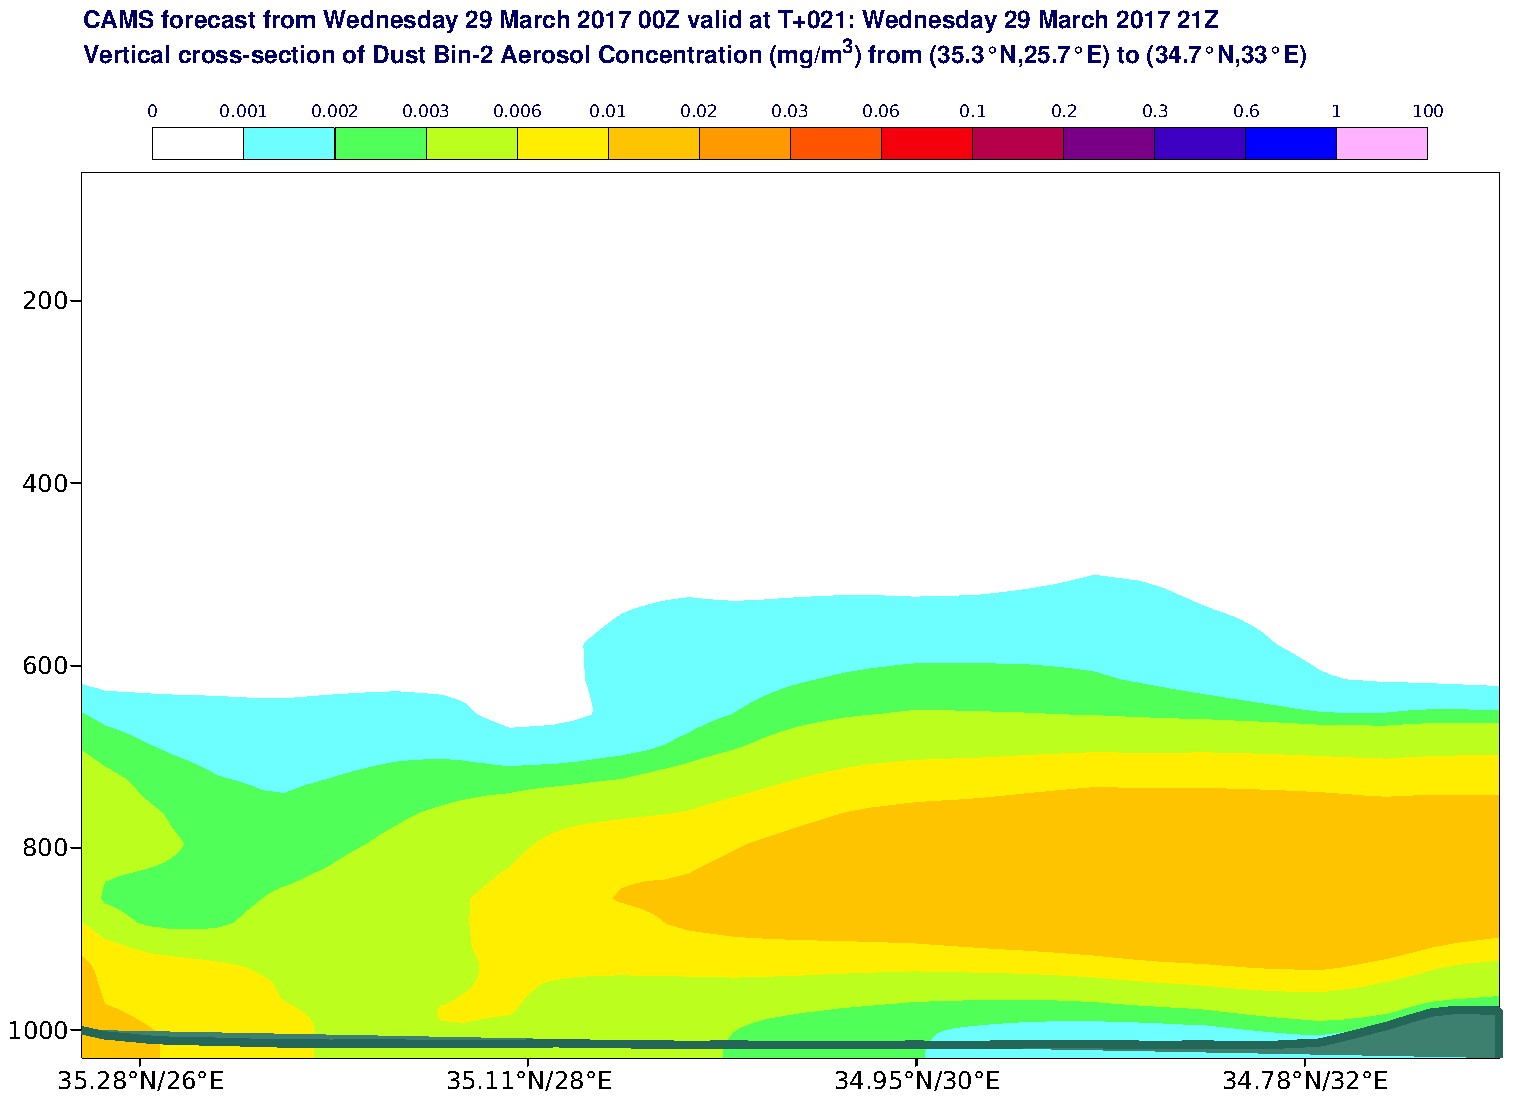 Vertical cross-section of Dust Bin-2 Aerosol Concentration (mg/m3) valid at T21 - 2017-03-29 21:00